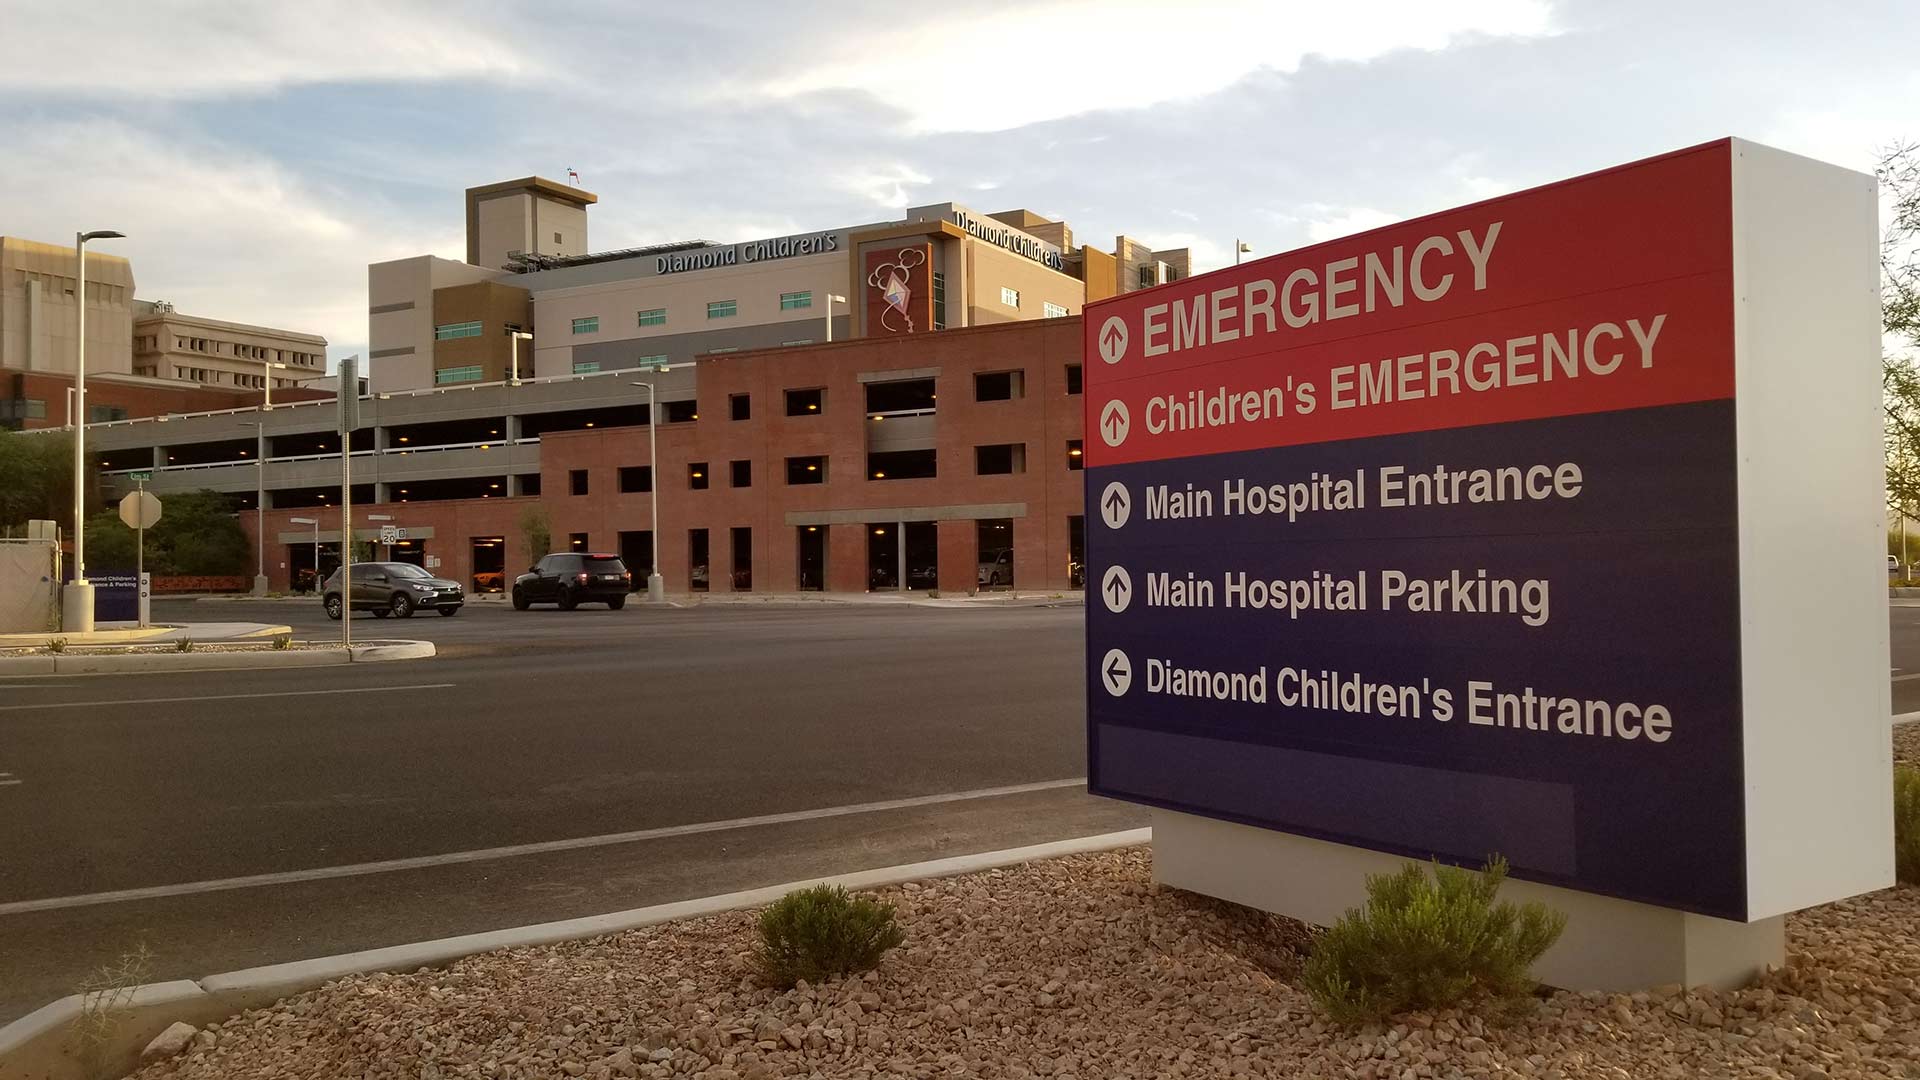 A sign directing visitors to the emergency room at Banner University Medical Center